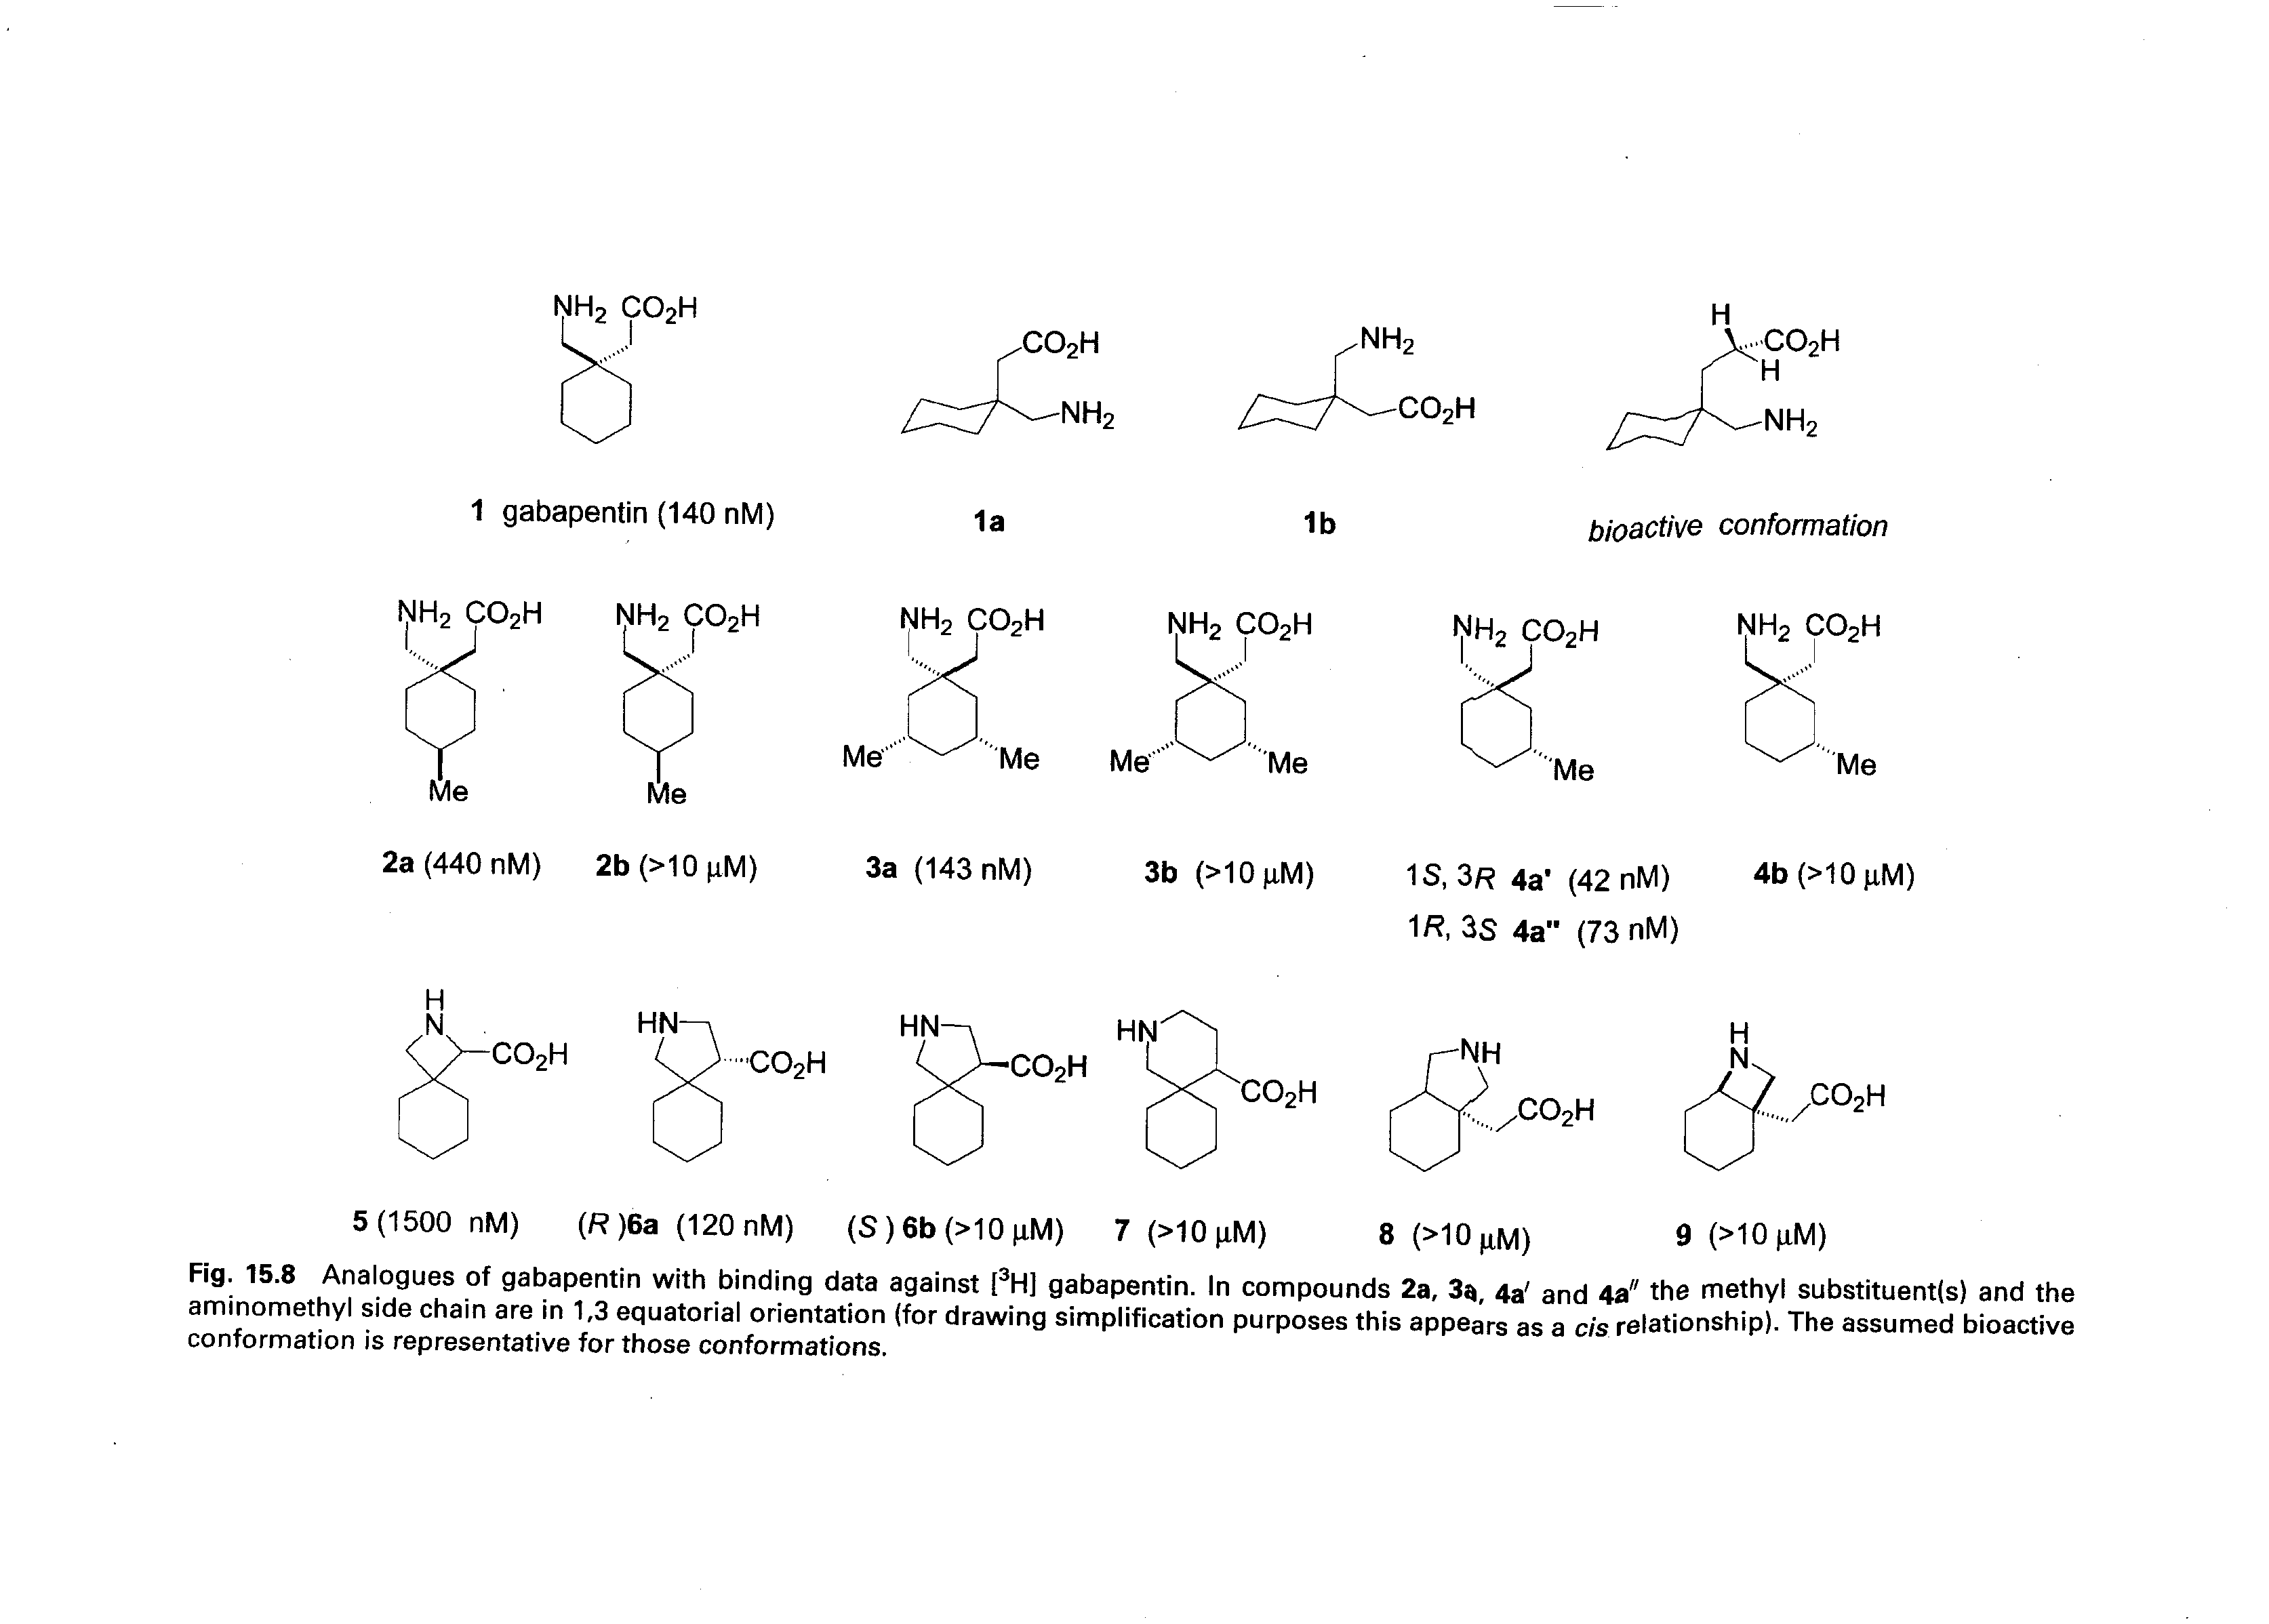 Fig. 15.8 Analogues of gabapentin with binding data against pH] gabapentin. In compounds 2a, 3, 4a and 4a" the methyl substituent(s) and the aminomethyl side chain are in 1,3 equatorial orientation (for drawing simplification purposes this appears as a c/s relationship). The assumed bioactive conformation is representative for those conformations.